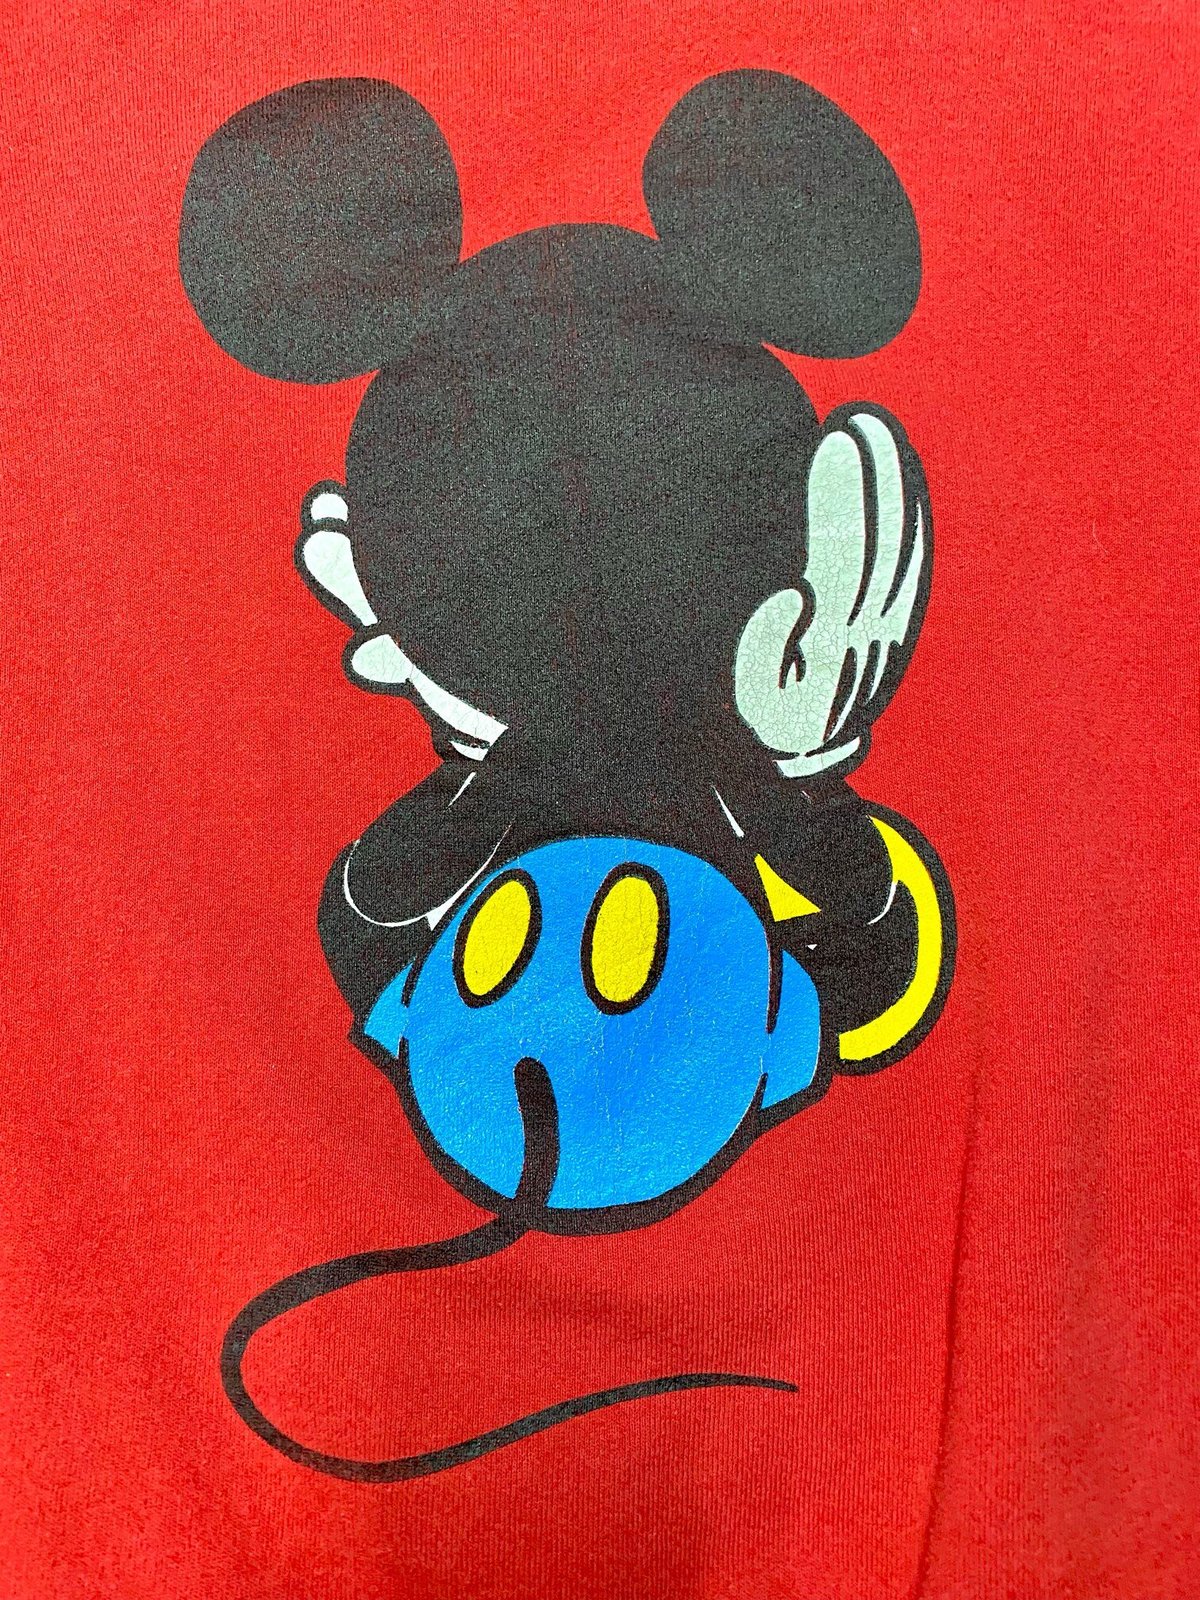 vintage／90s Mickey Mouse trainer | 古着屋 BIG BABY